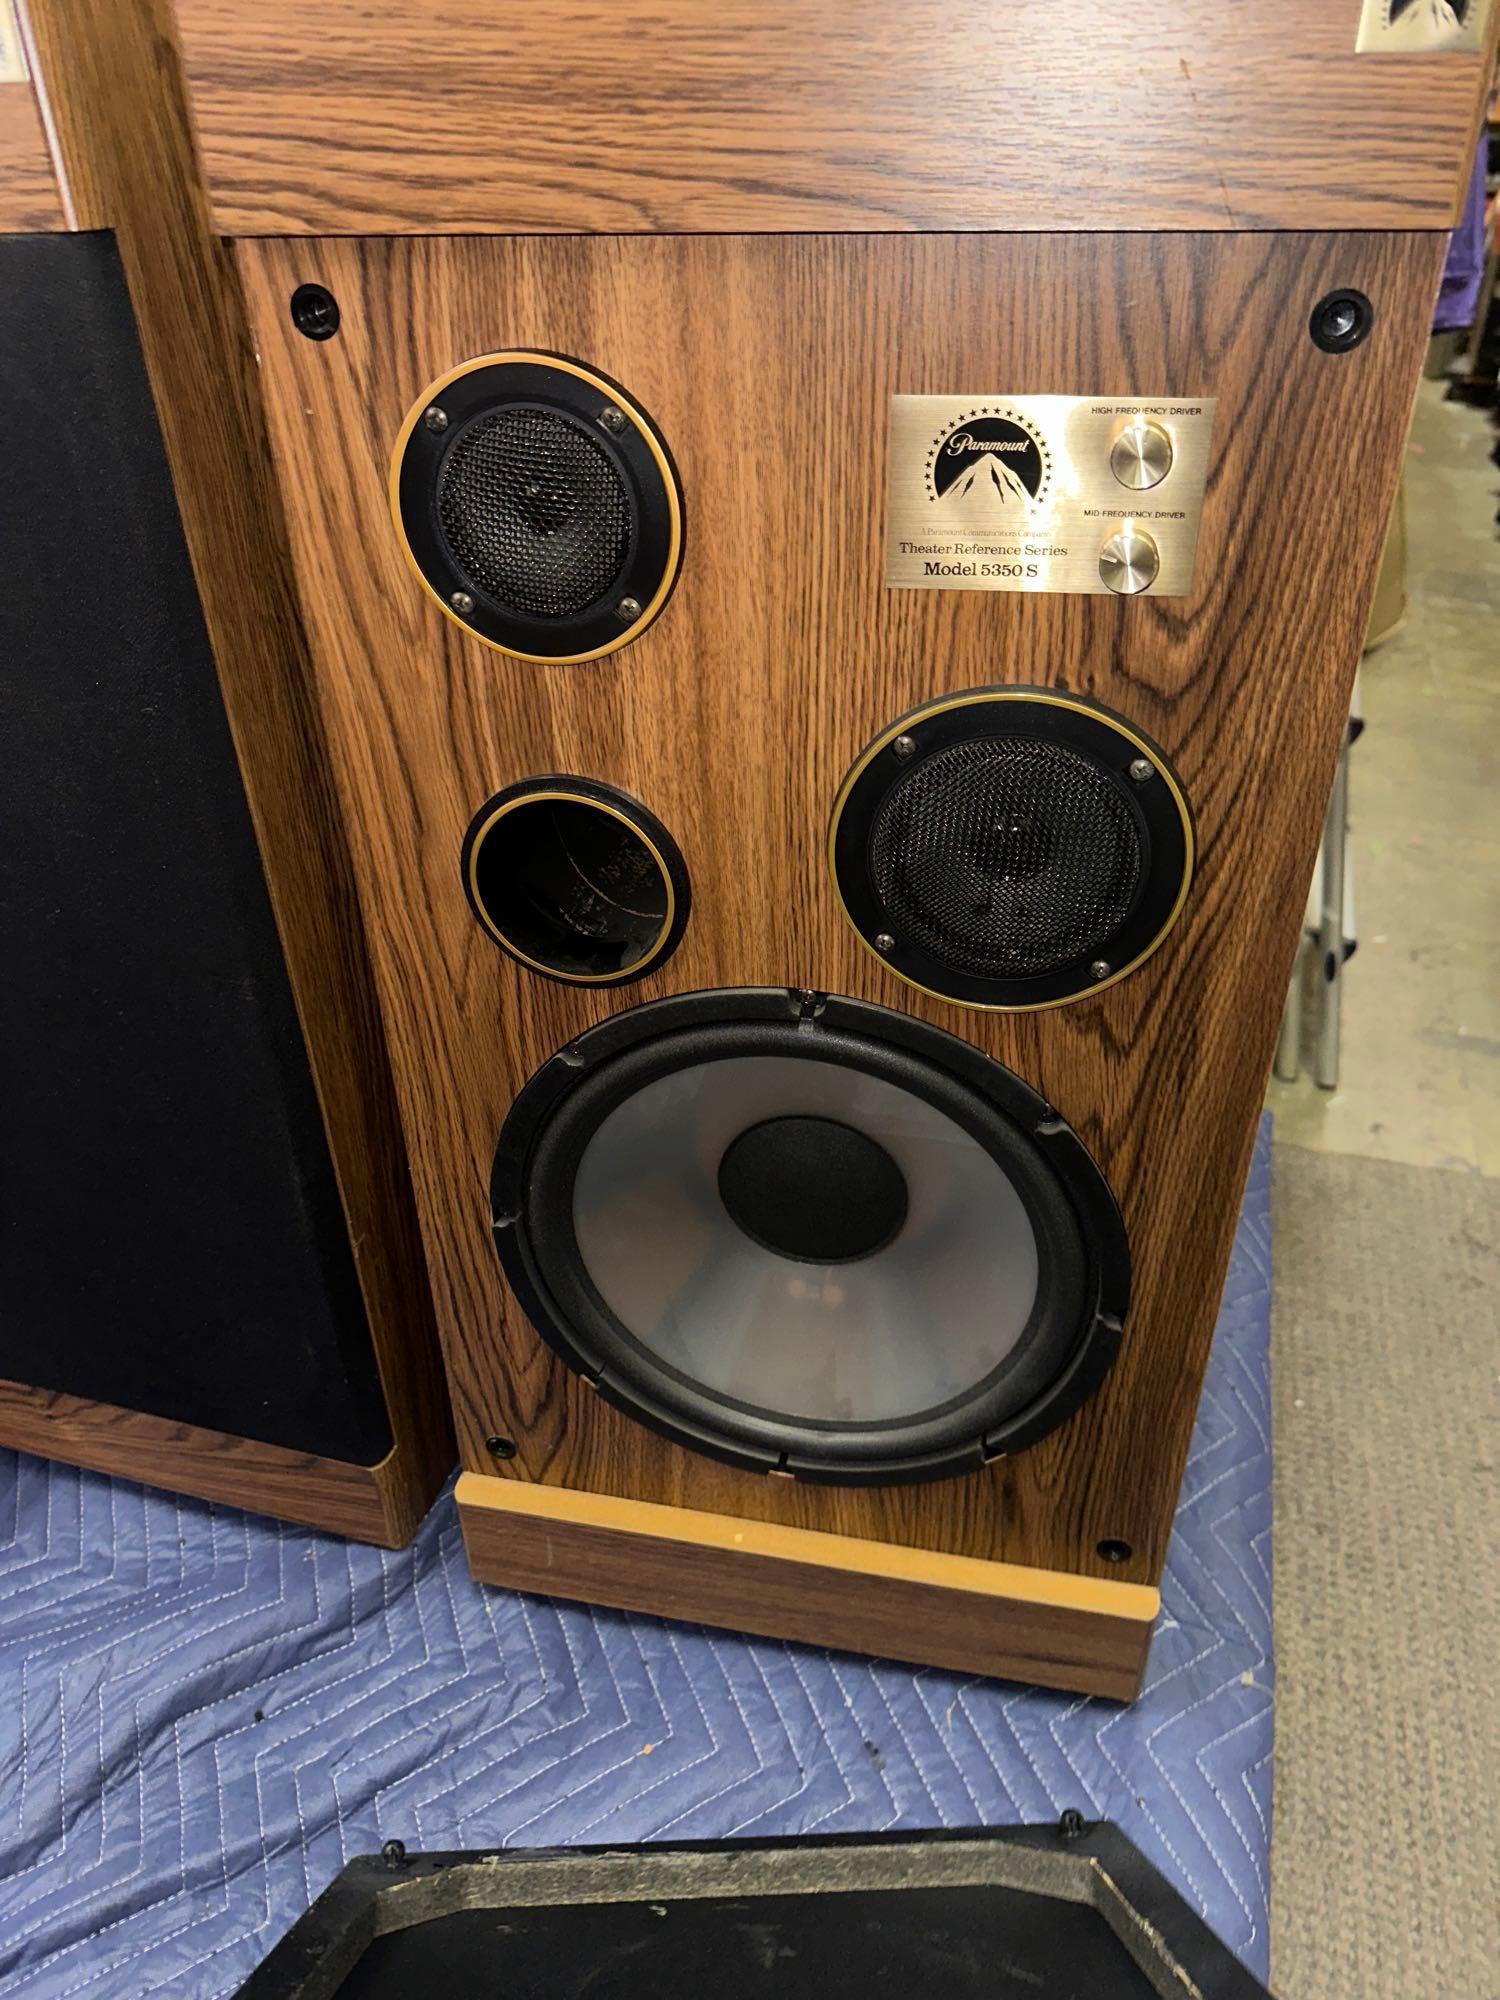 2 Paramount Theater Reference Series Speakers model 5350S - work